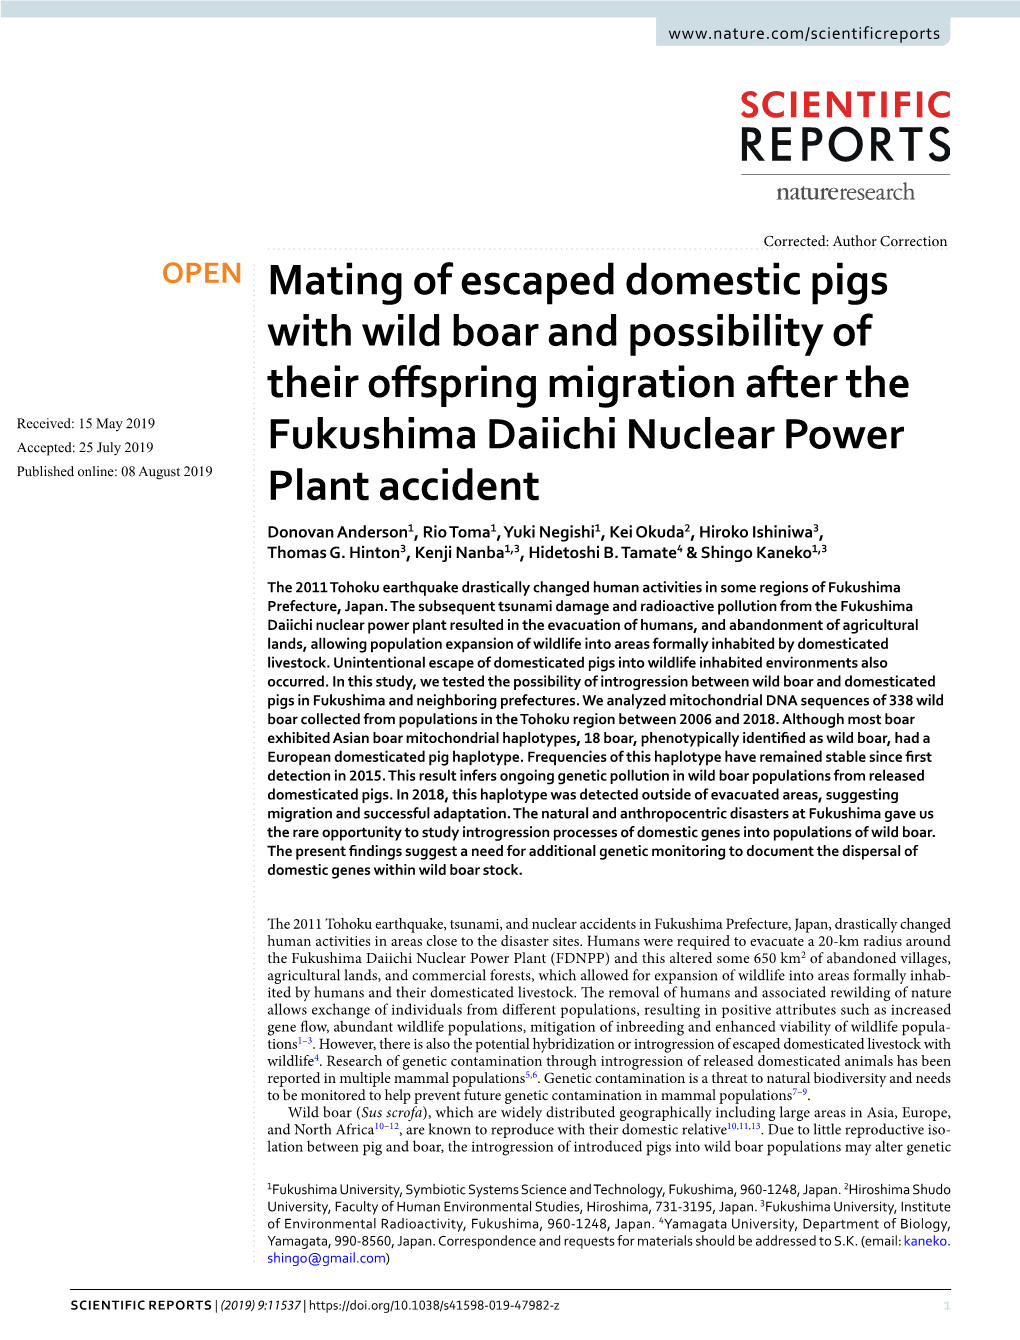 Mating of Escaped Domestic Pigs with Wild Boar and Possibility of Their Offspring Migration After the Fukushima Daiichi Nuclear